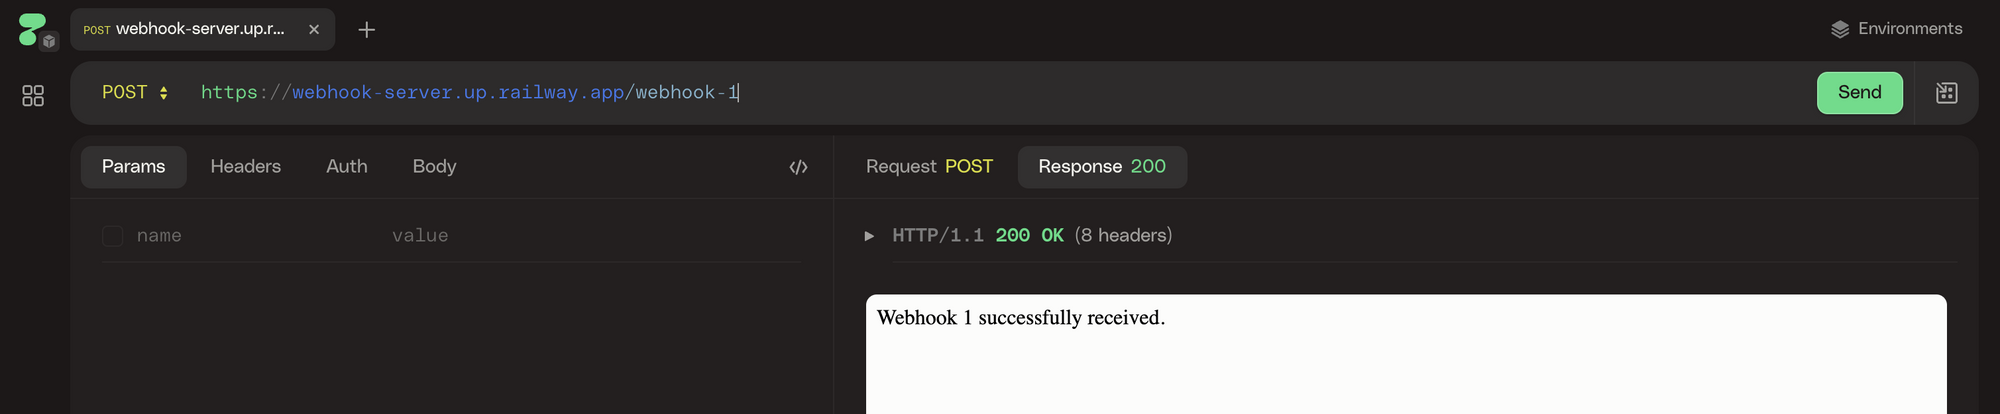 HTTP POST web request to the webhook server